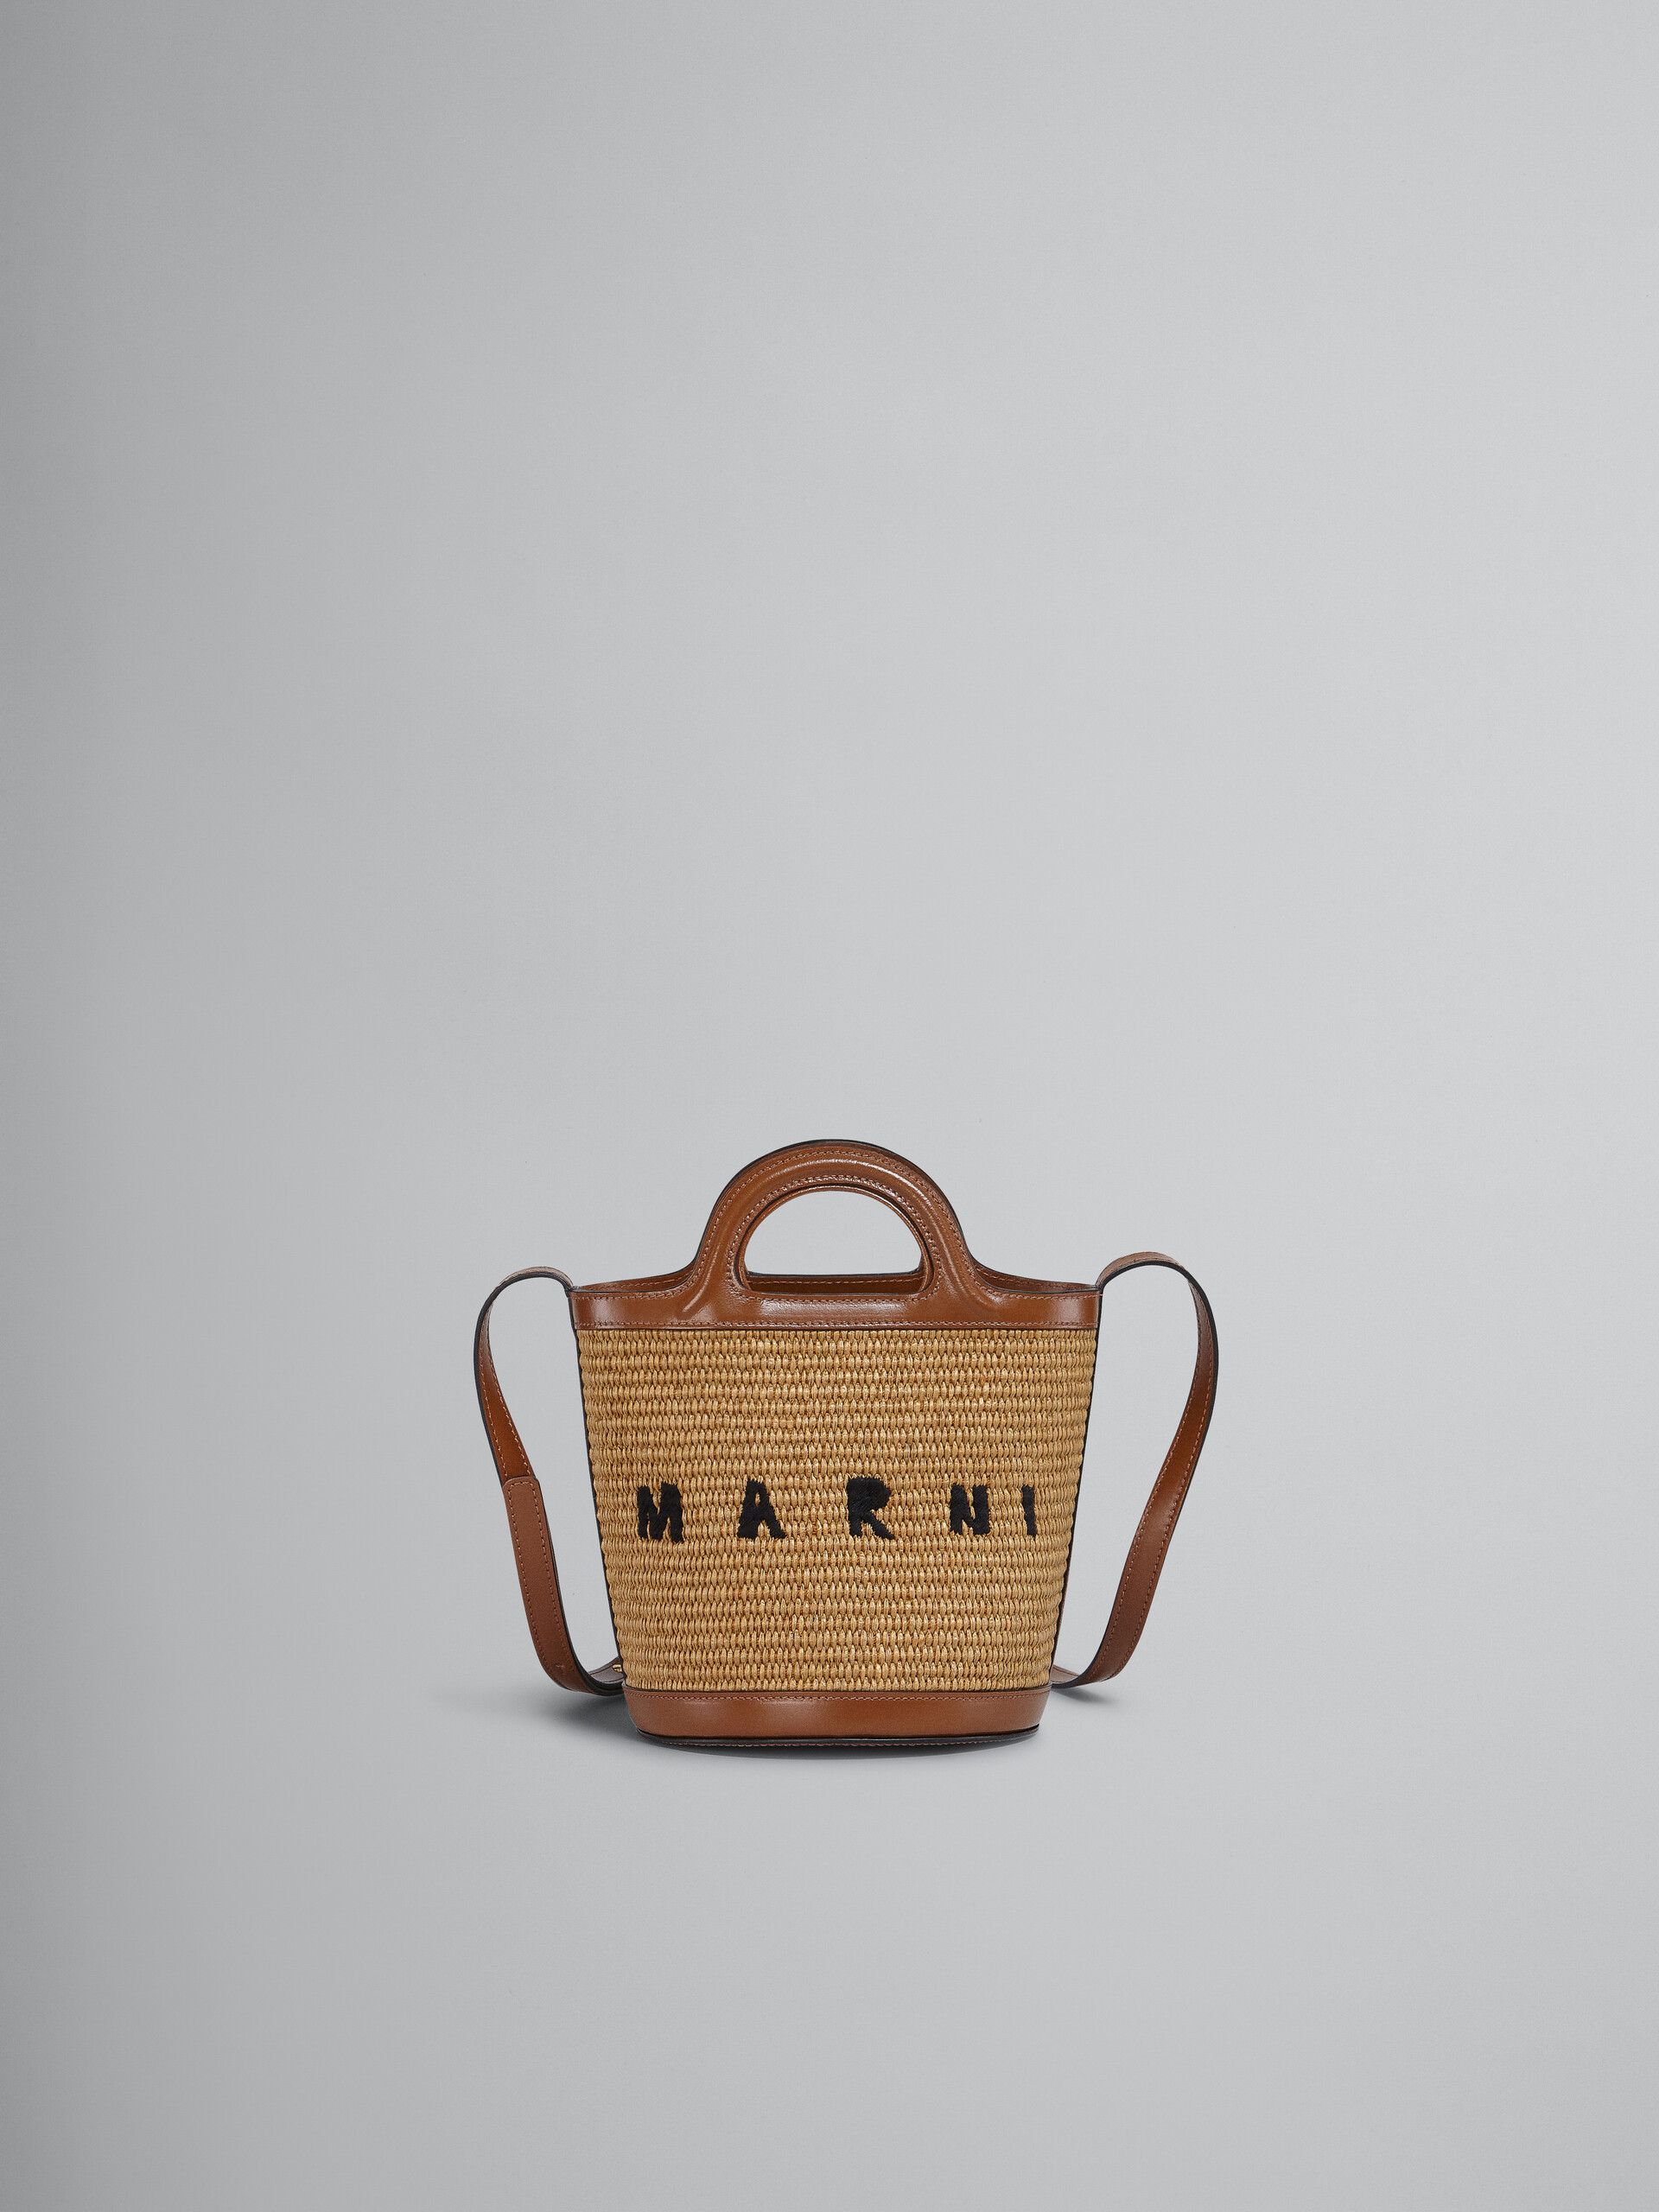 Tropicalia Small Bucket Bag in brown leather and raffia-effect fabric - Shoulder Bags - Image 1